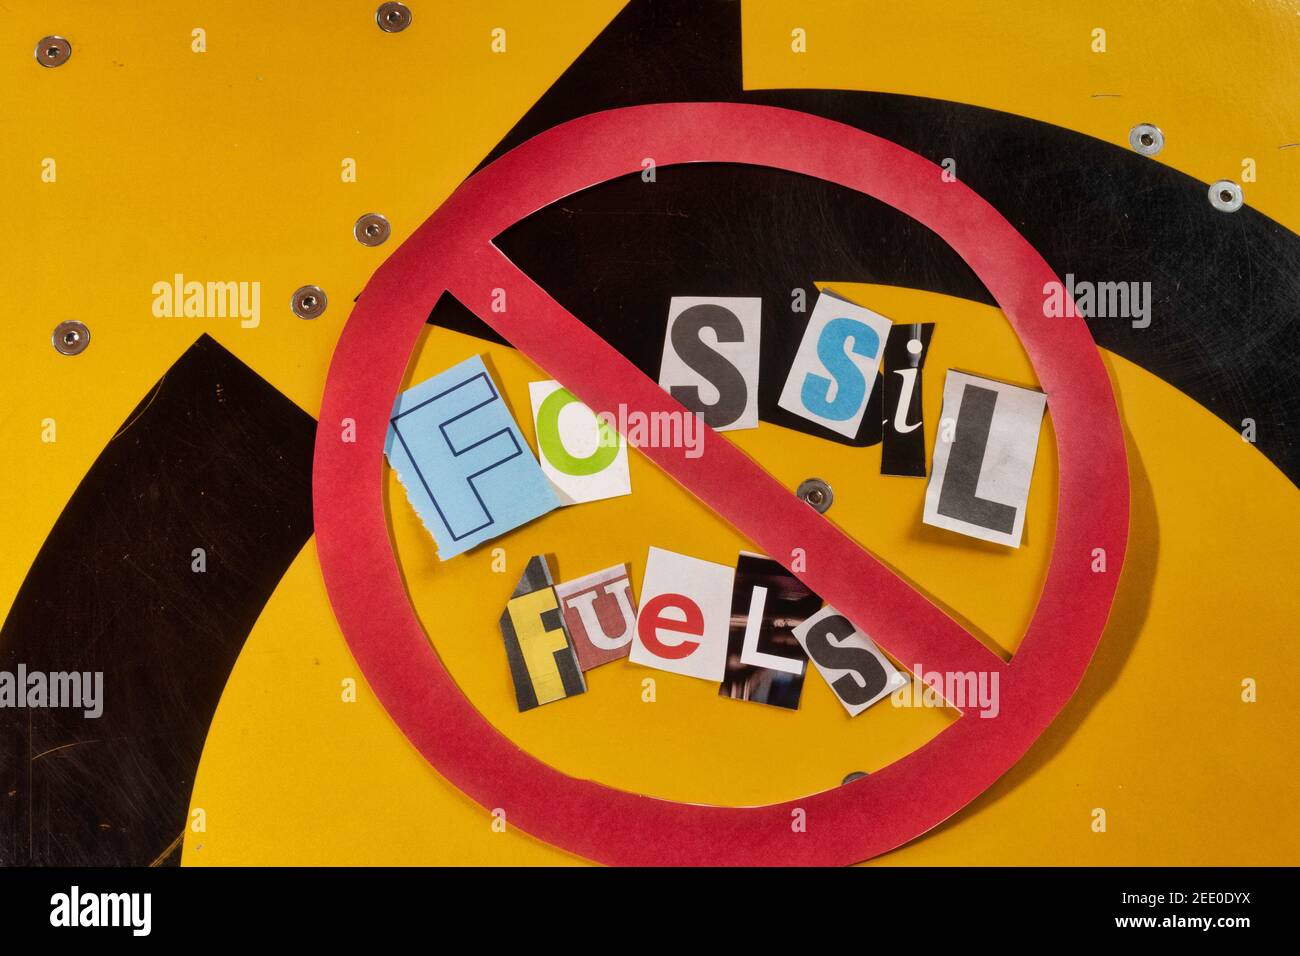 The Concept of 'Cancel Fossil Fuels' using cut-out paper letters in the ransom note effect typography inside The International NO Symbol, USA Stock Photo